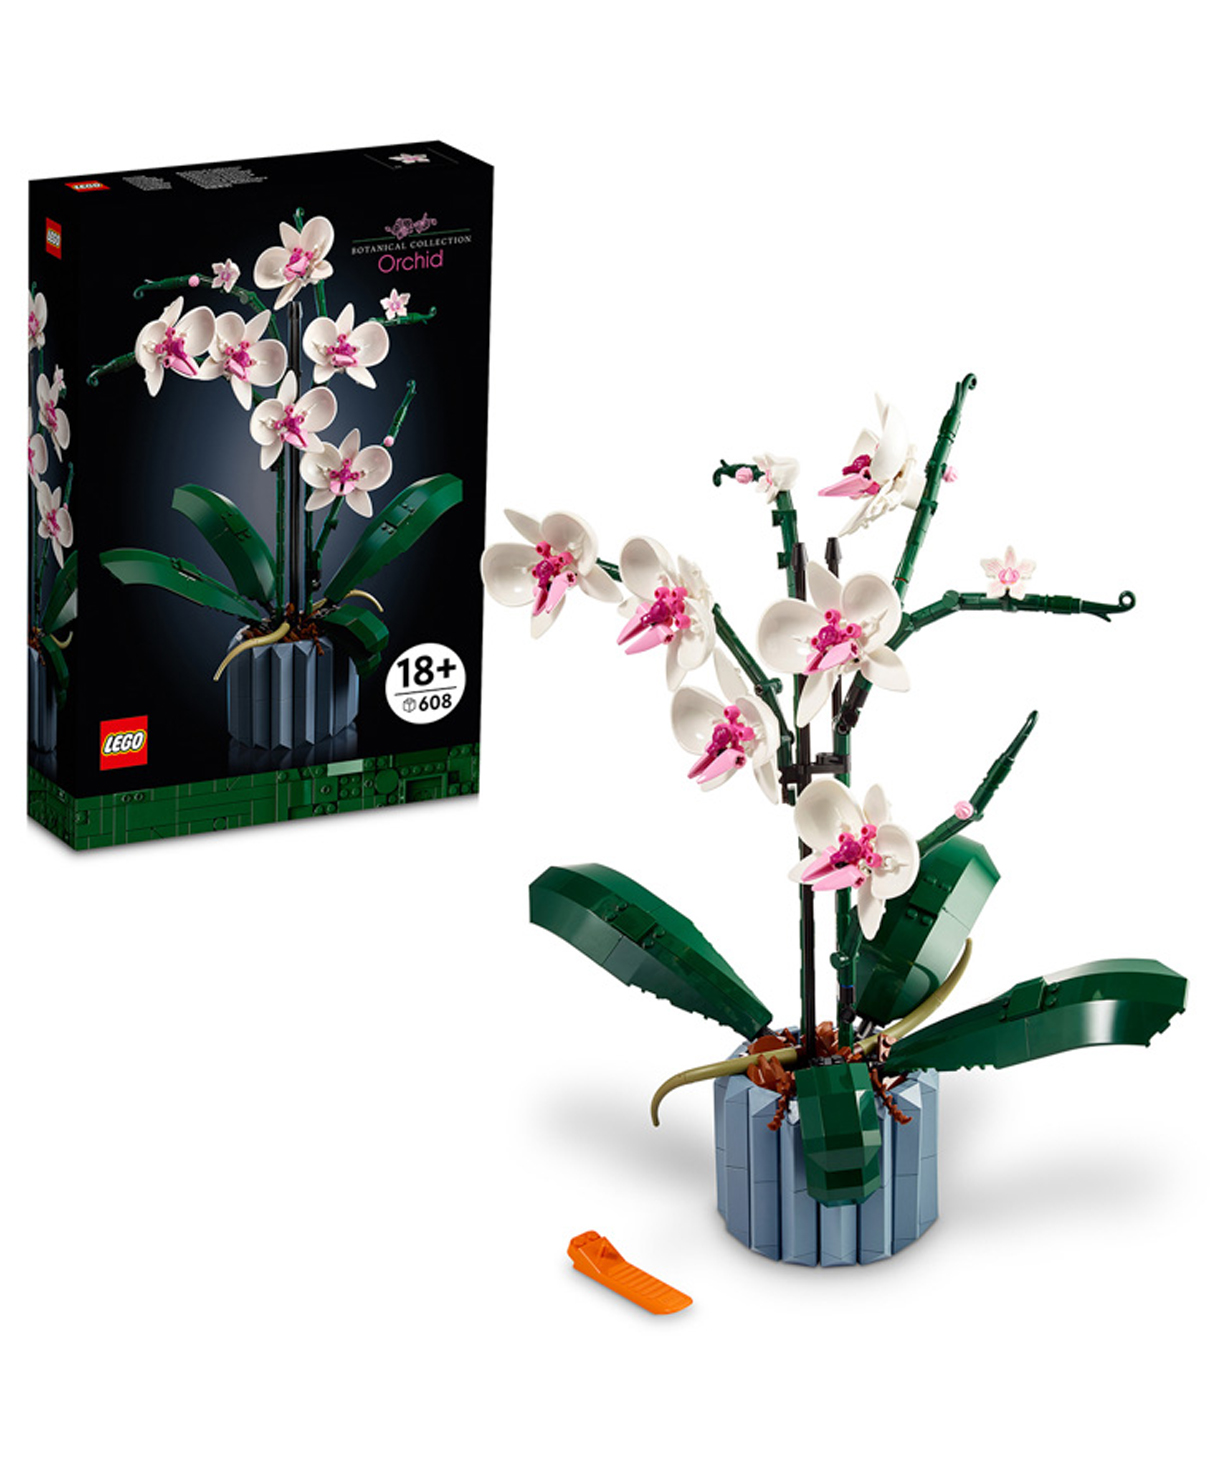 Constructor LEGO Icons Orchid Botanical collection